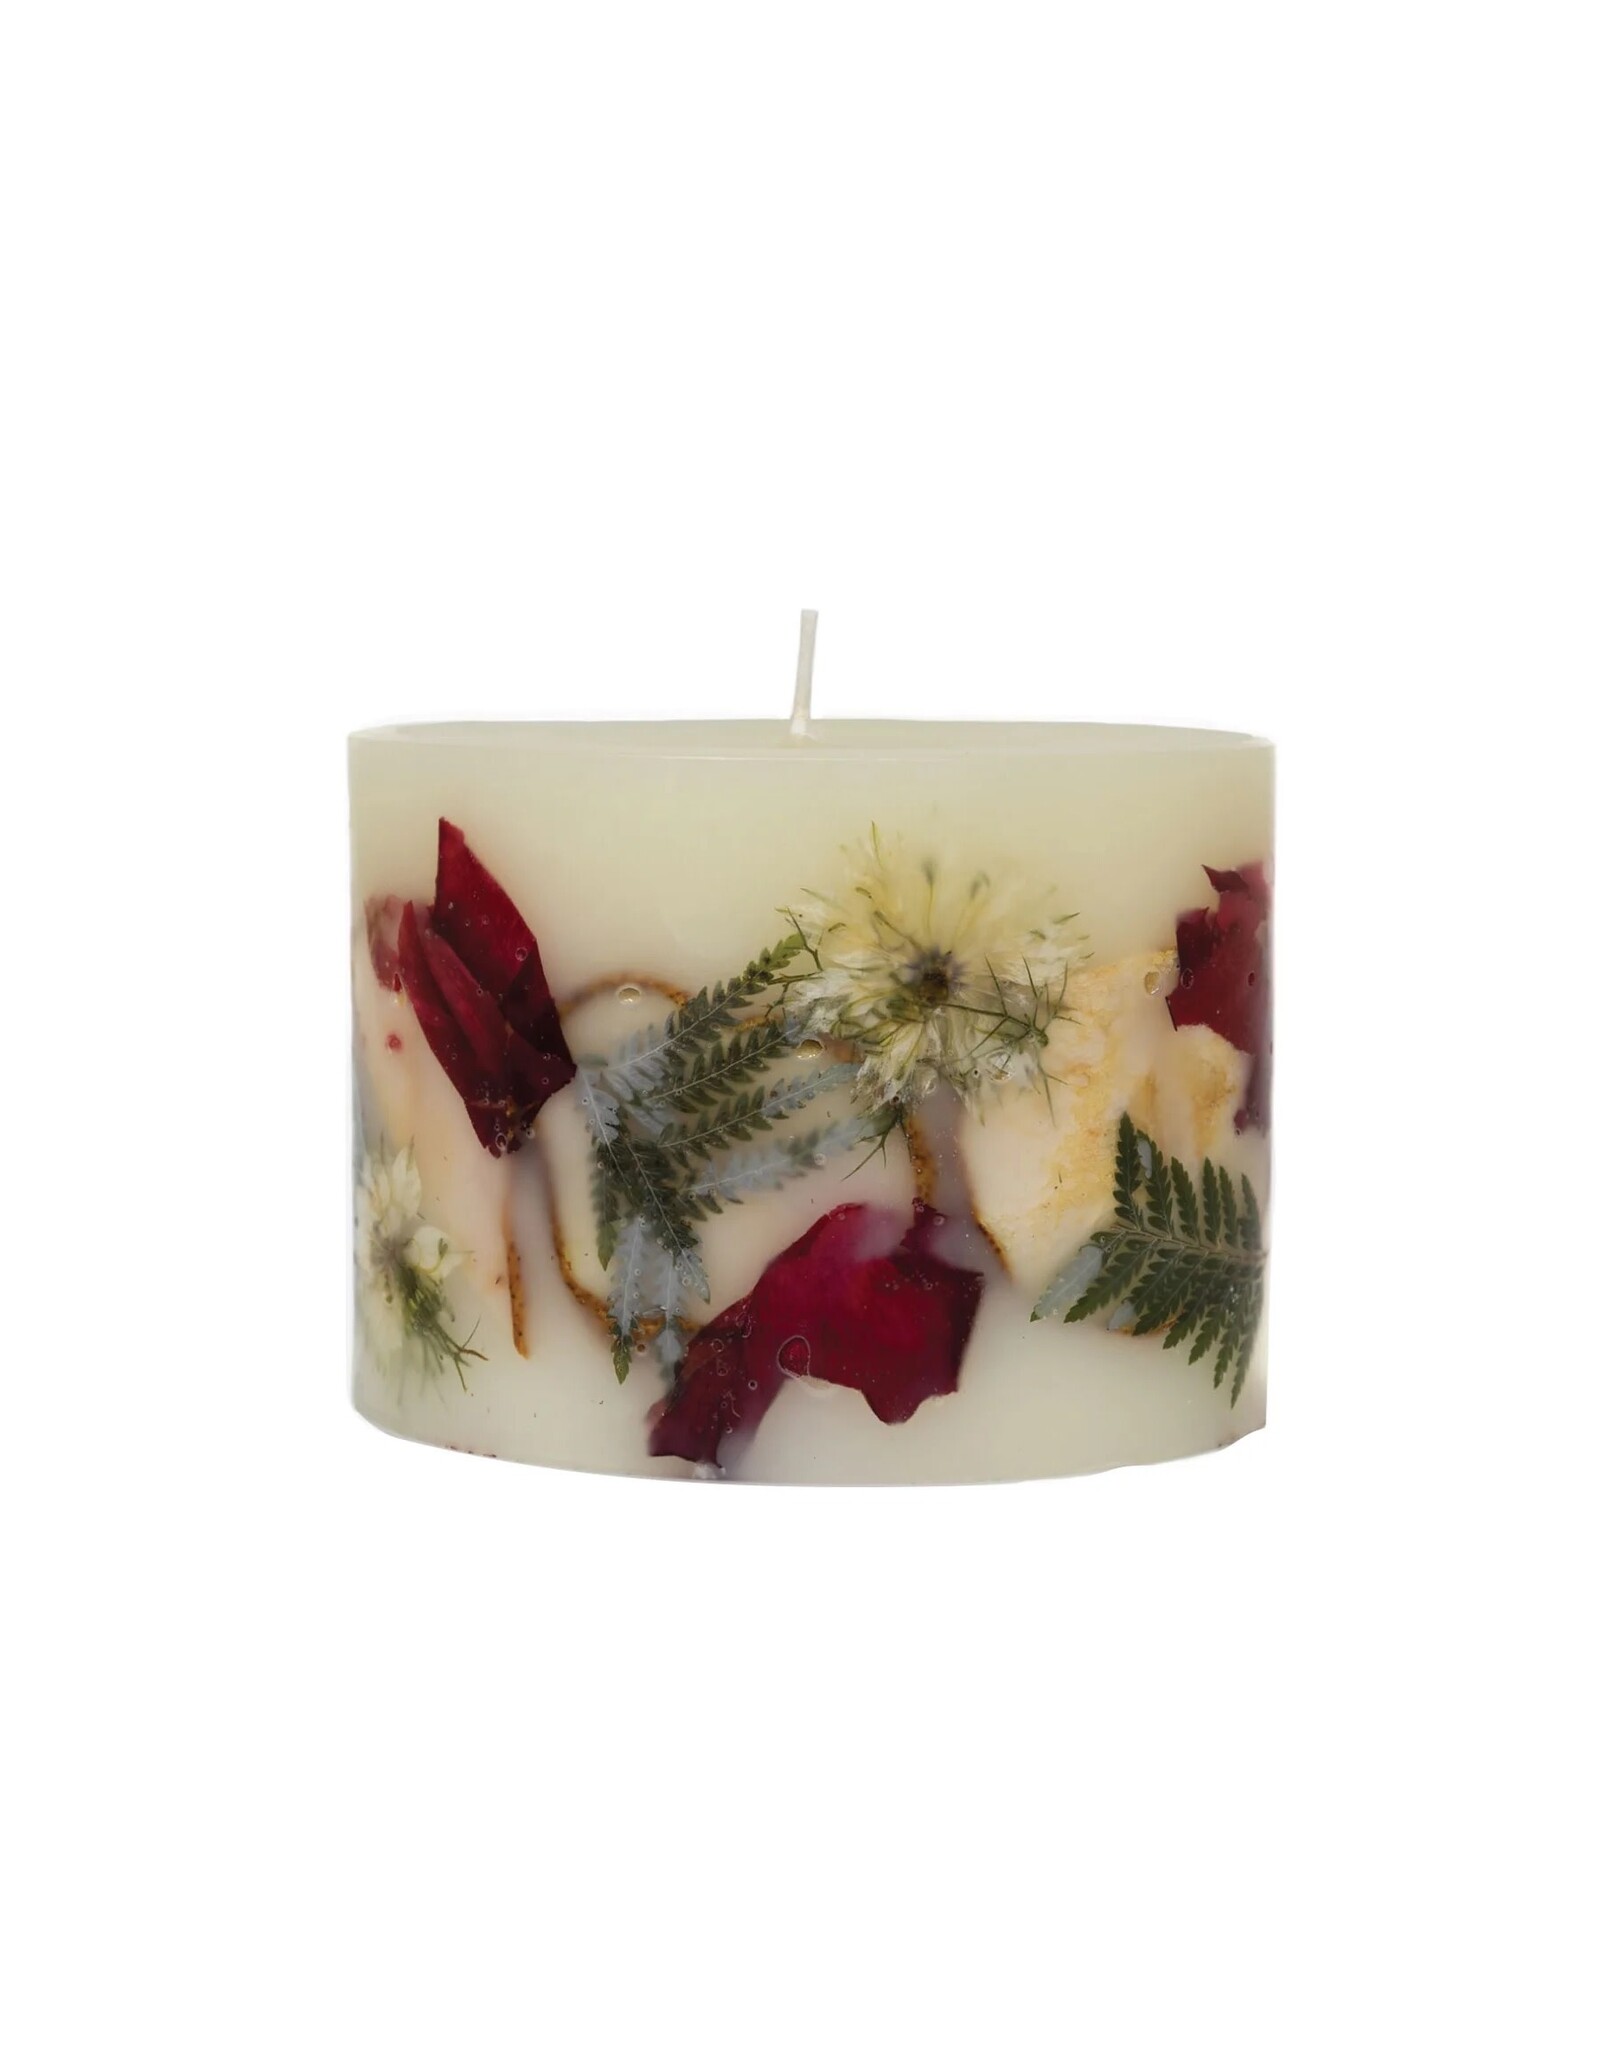 Rosy Rings Spicy Apple Petite Oval Botanical Candle 3.9x3x3